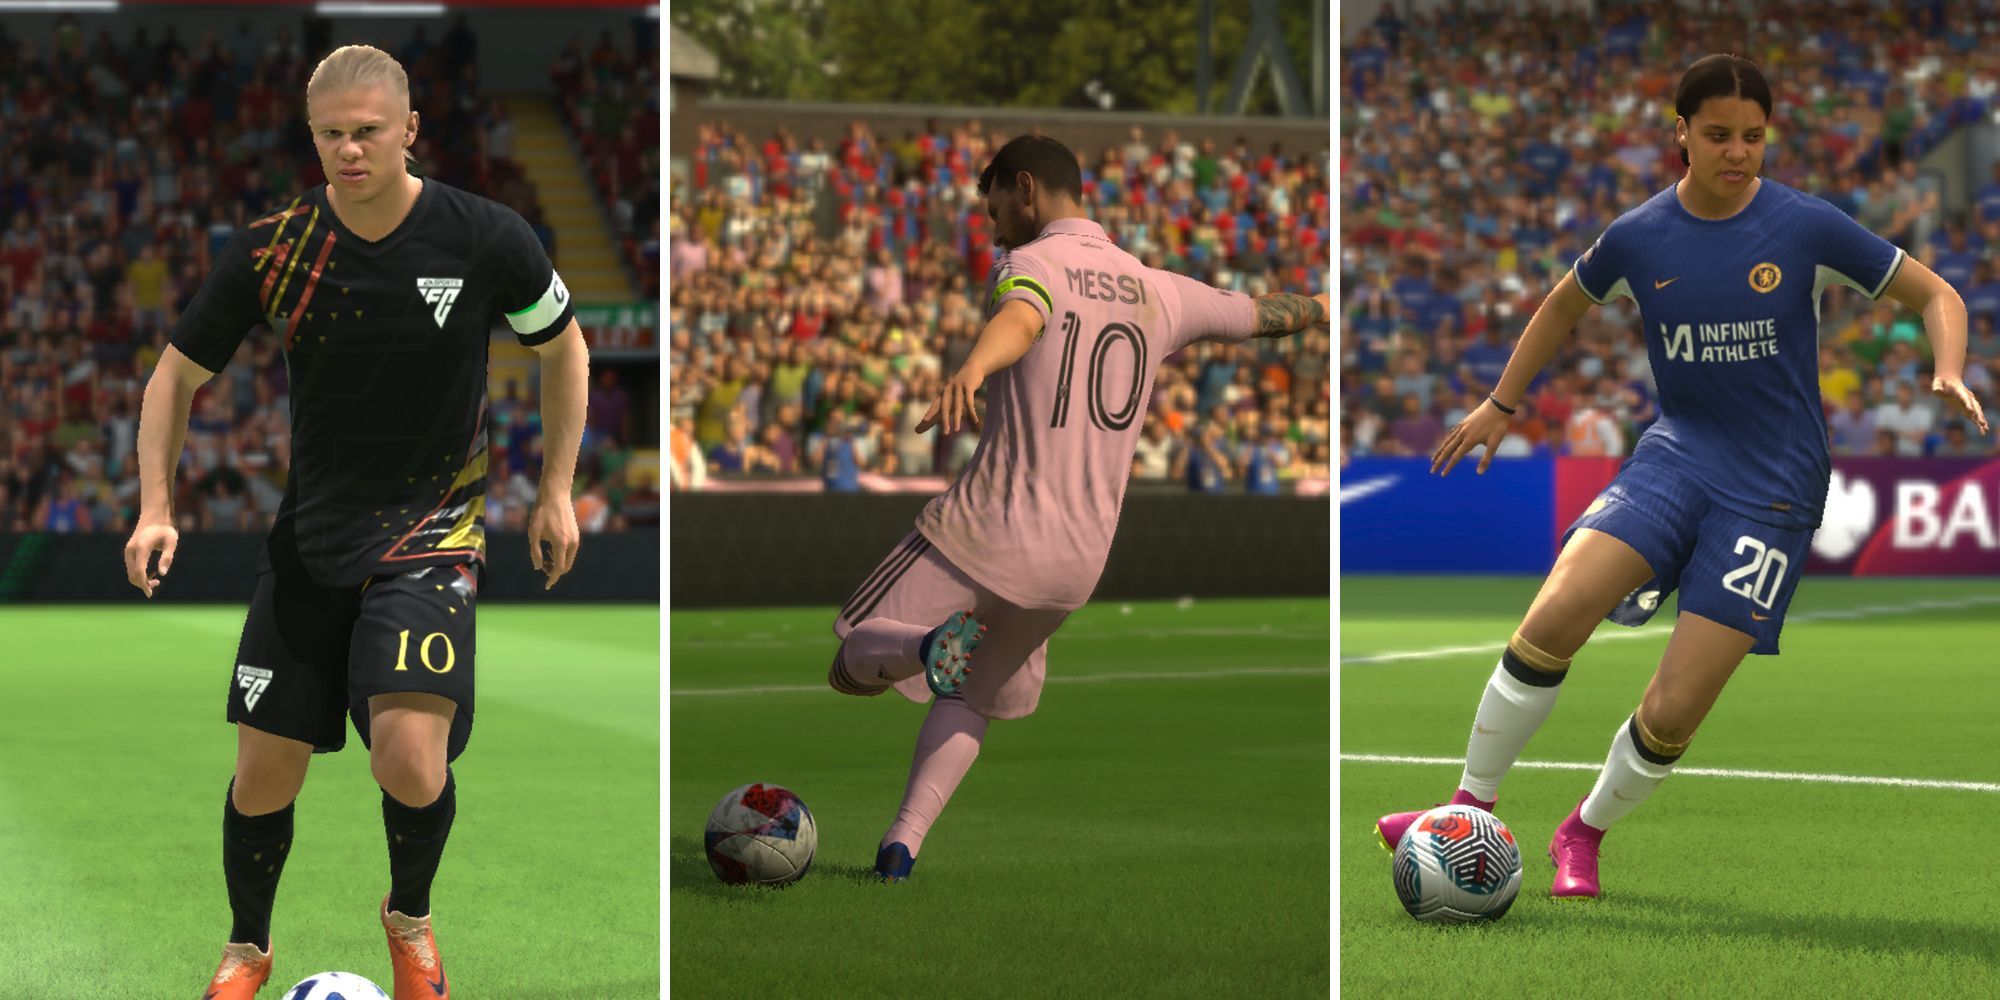 Snapshots from EA Sports FC 24 feature, from left to right, Erling Haaland, Lionel Messi, and Sam Kerr, all members of the game's 2023 Teams of the Year.